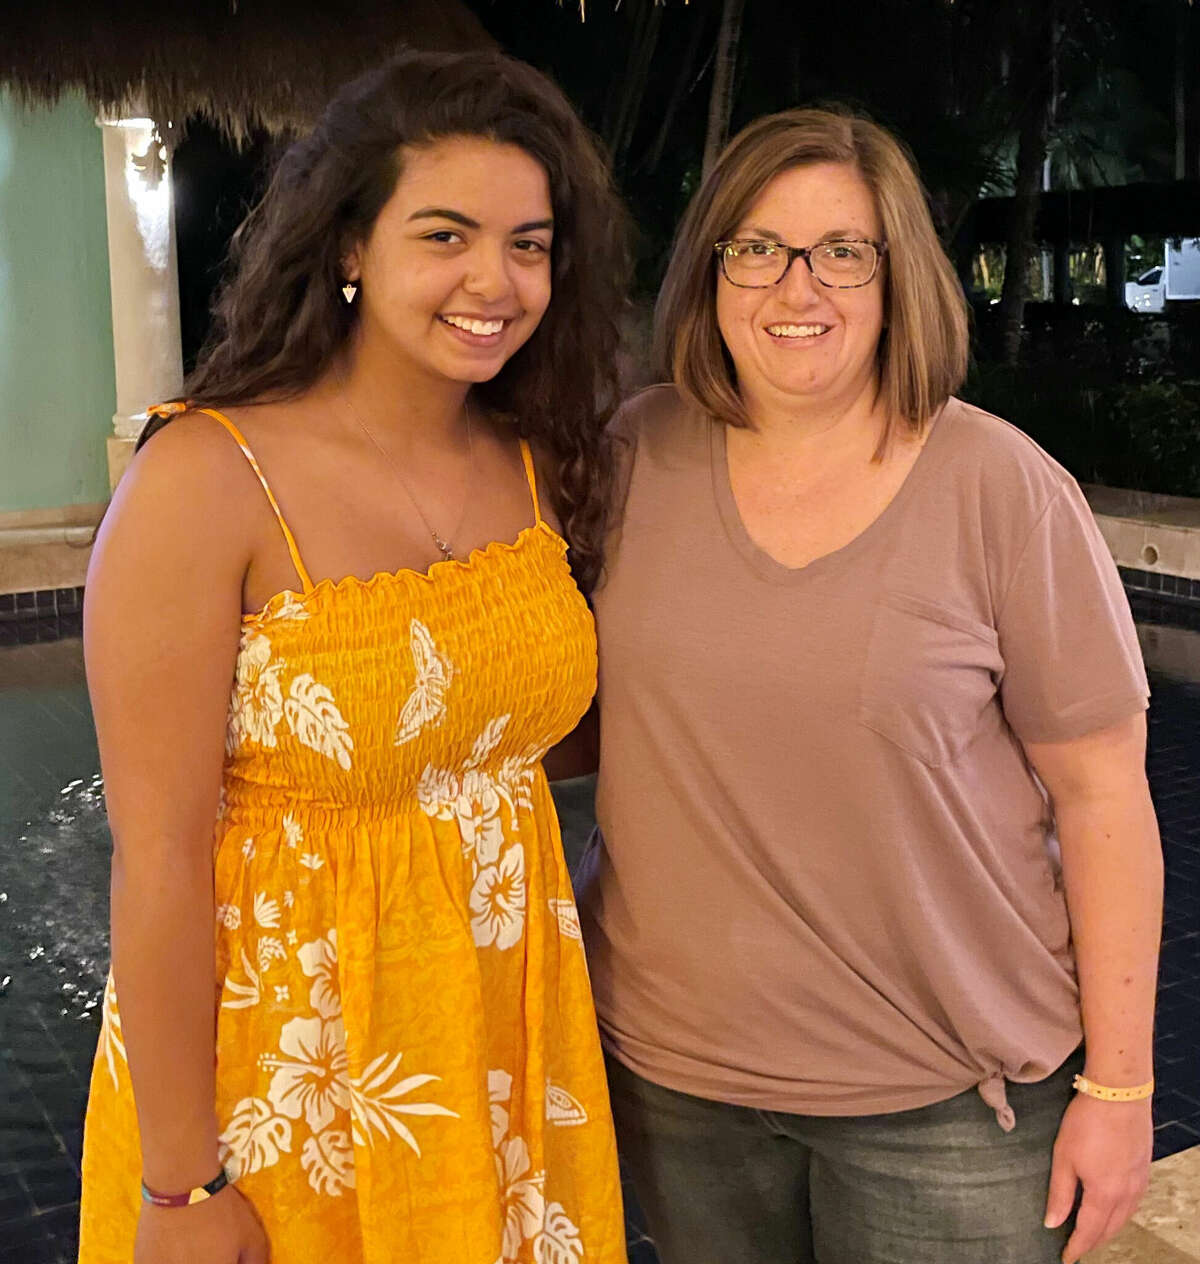 Taryn Wallace, left, is one Alton Memorial Hospital’s first two Health Equity Scholarship winners. She is pictured with her mom, Amanda.